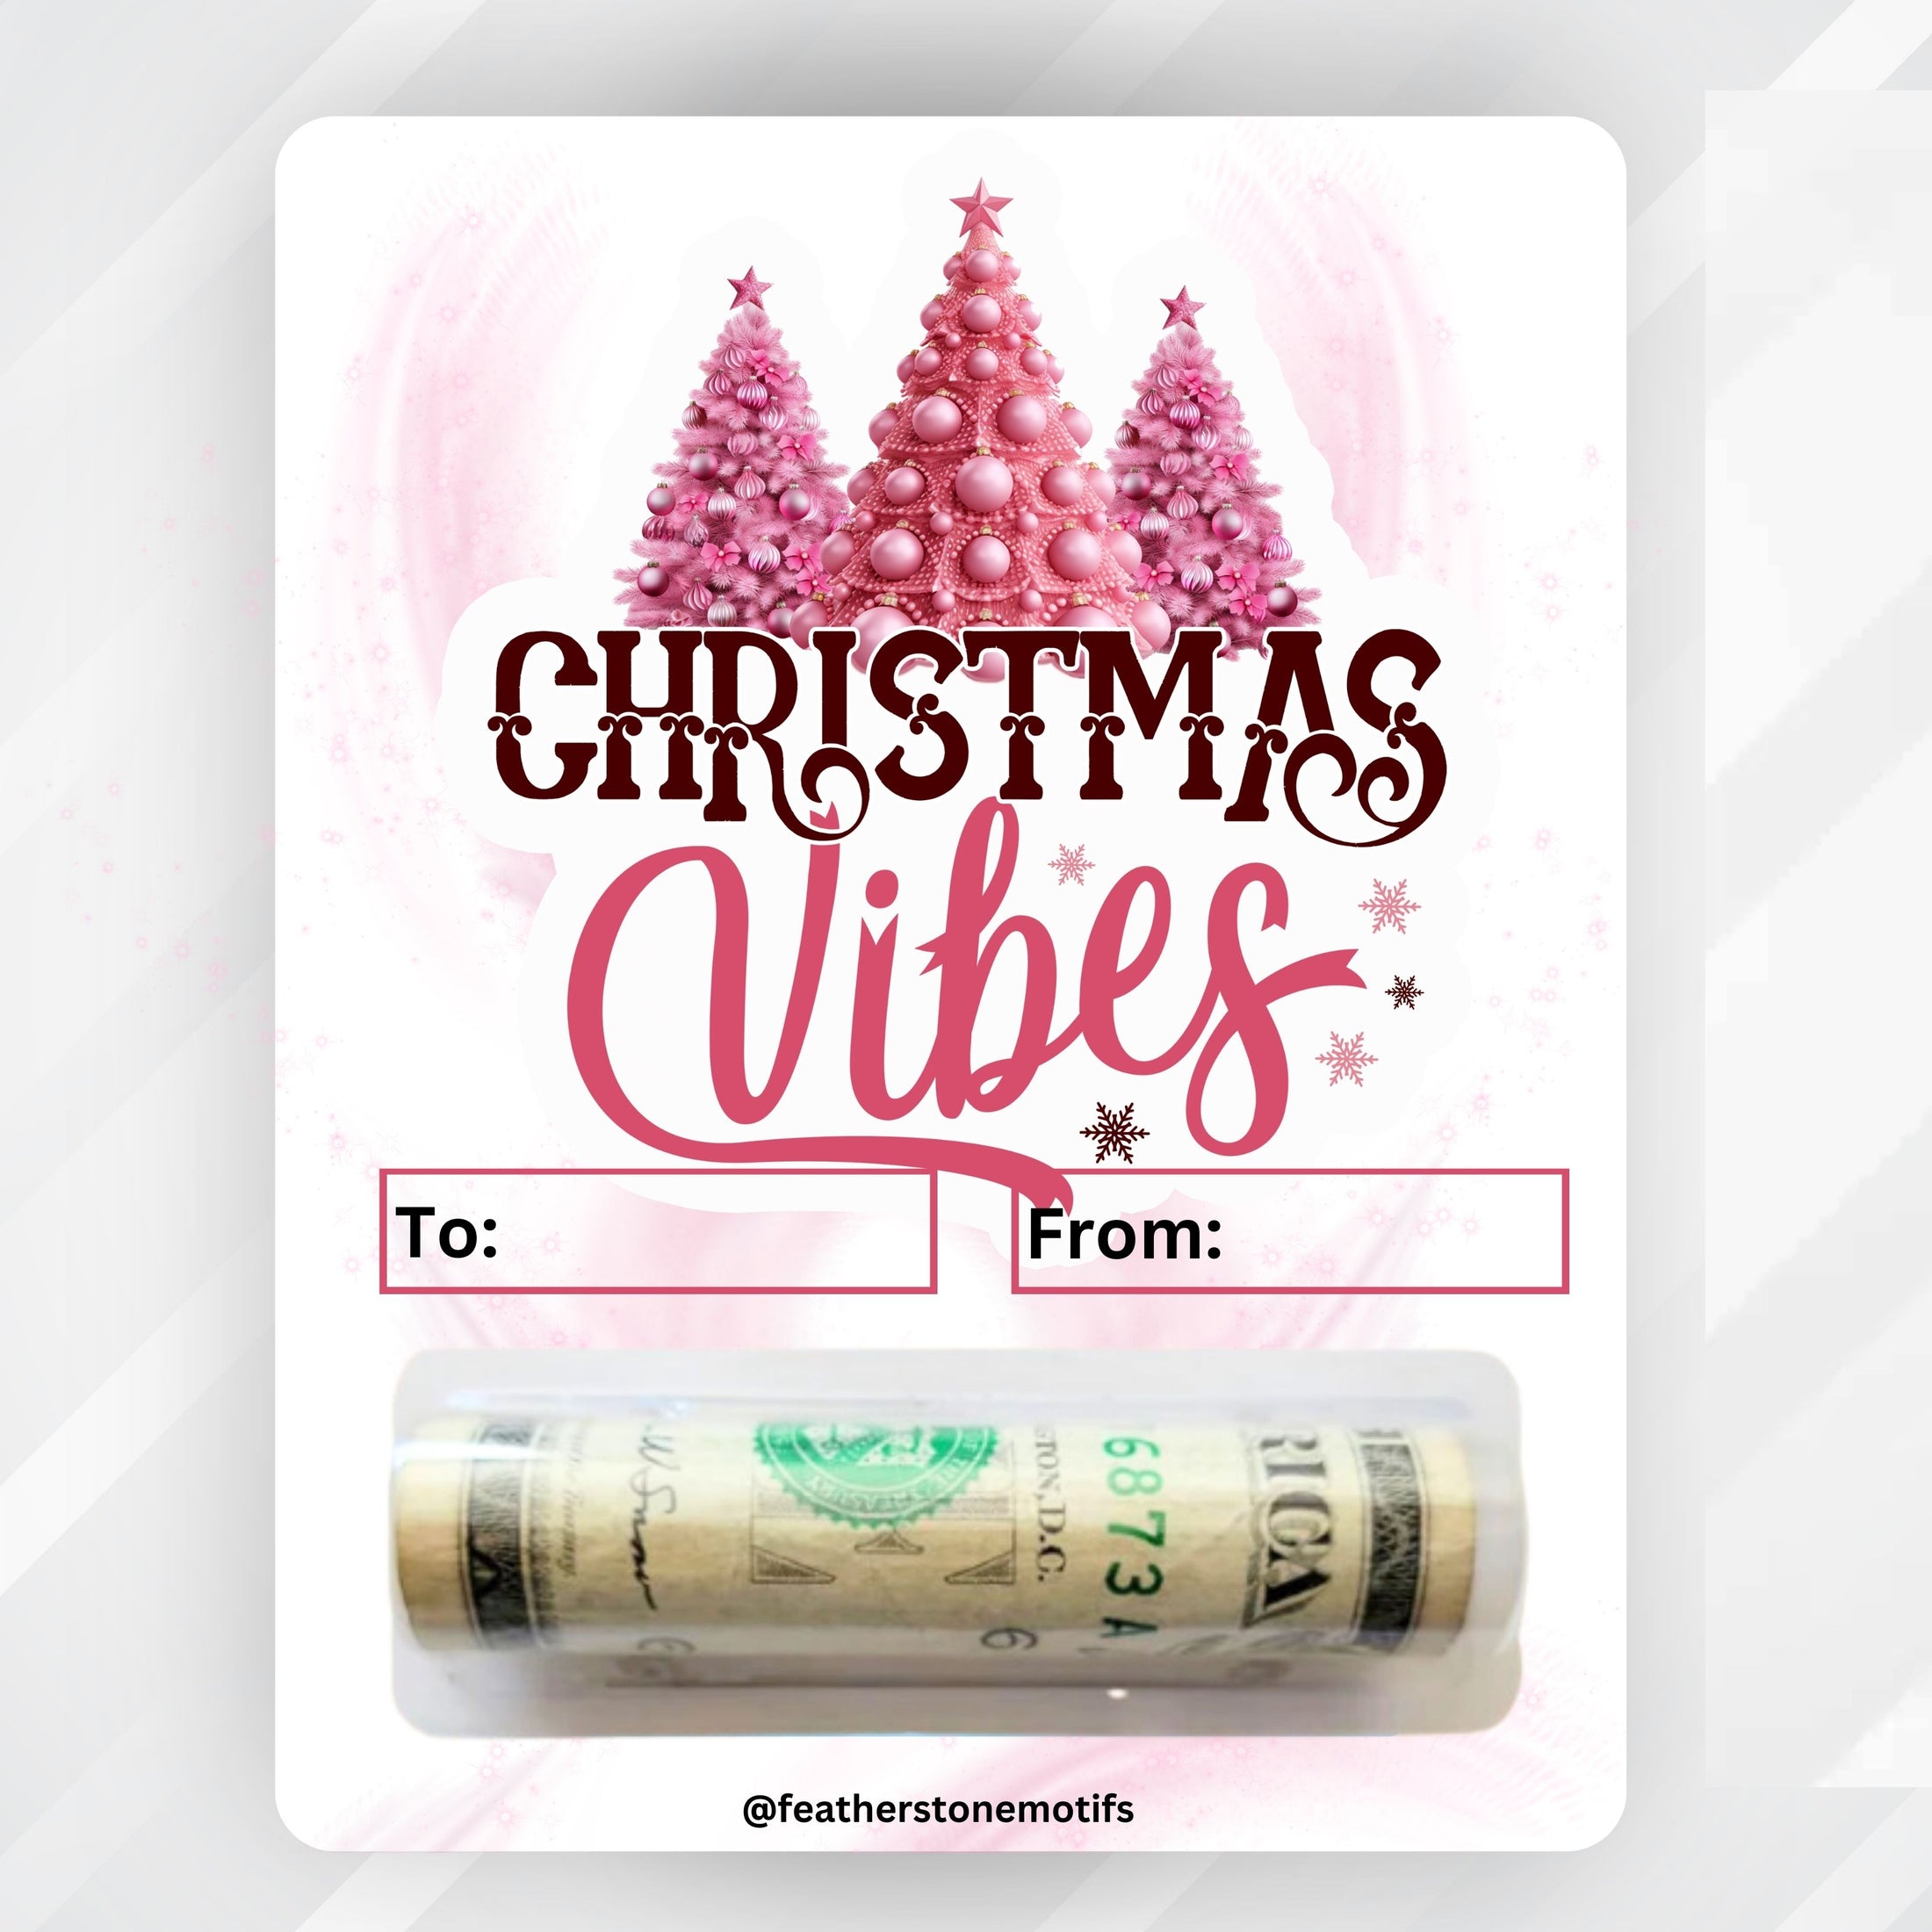 This image shows the Christmas Vibes money card with money tube attached.